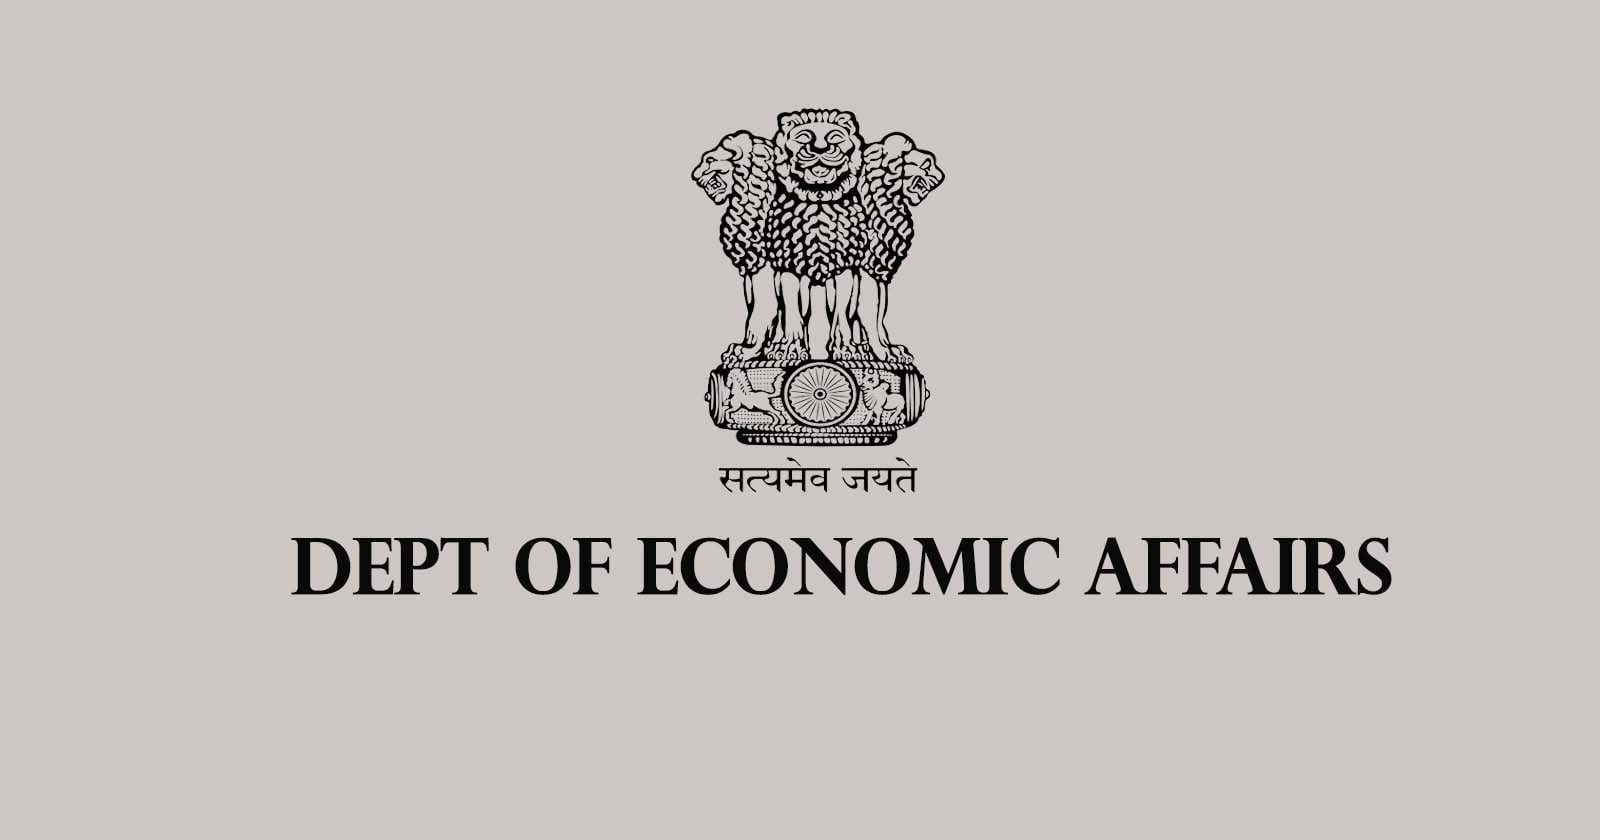 Dept of Economic Affairs Amends Foreign Exchange Management - Dept of Economic Affairs - Foreign Exchange Management - Current Account Transactions - taxscan